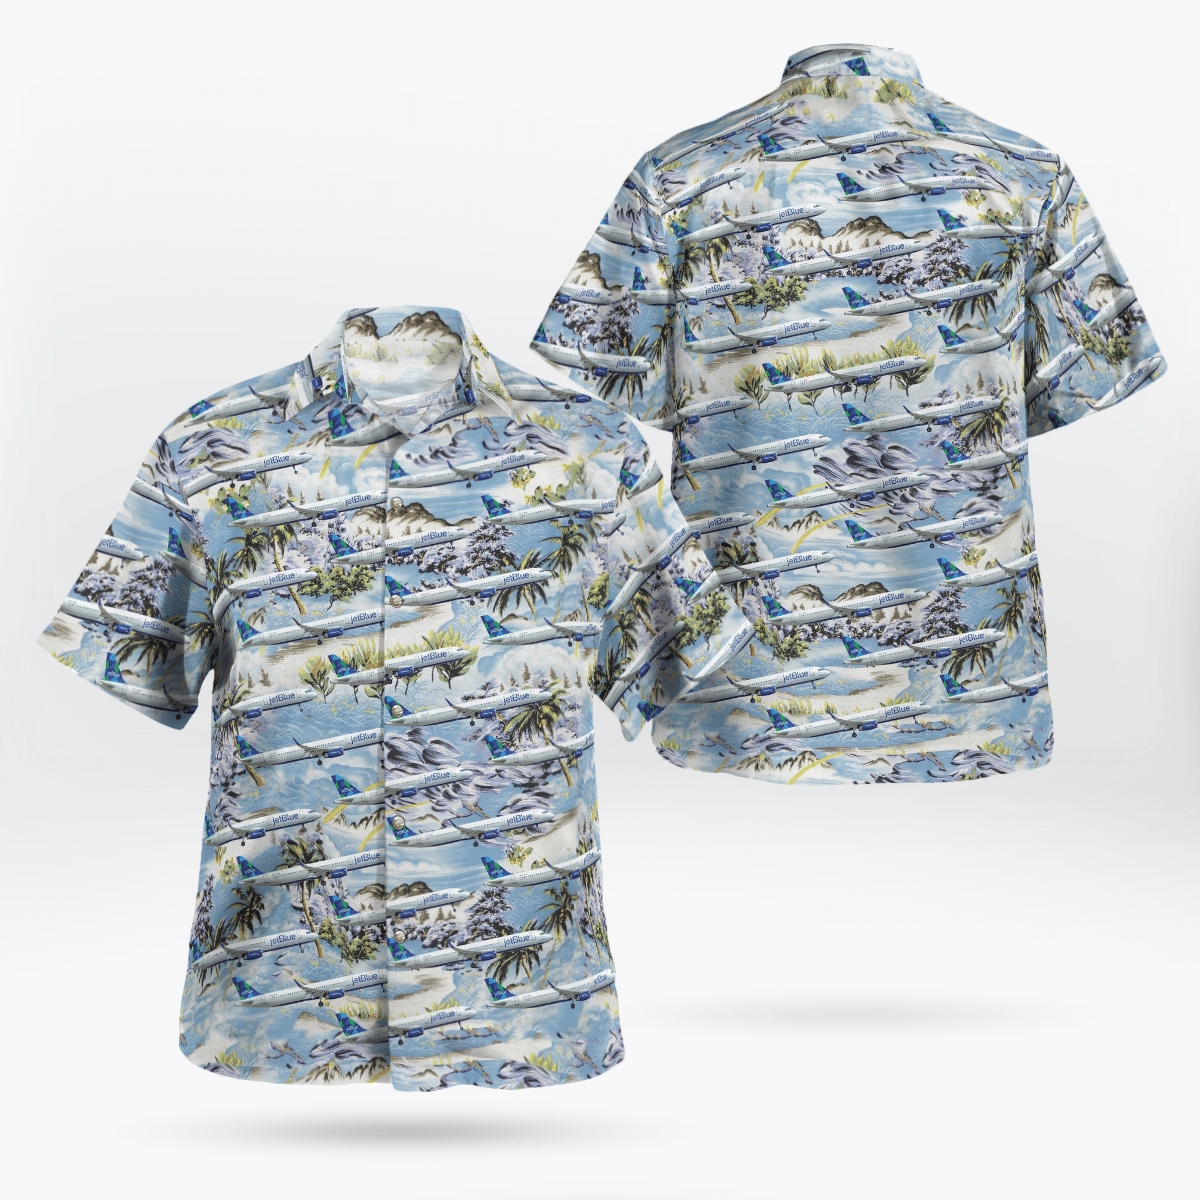 Consider getting these Hawaiian Shirt for your friends 229